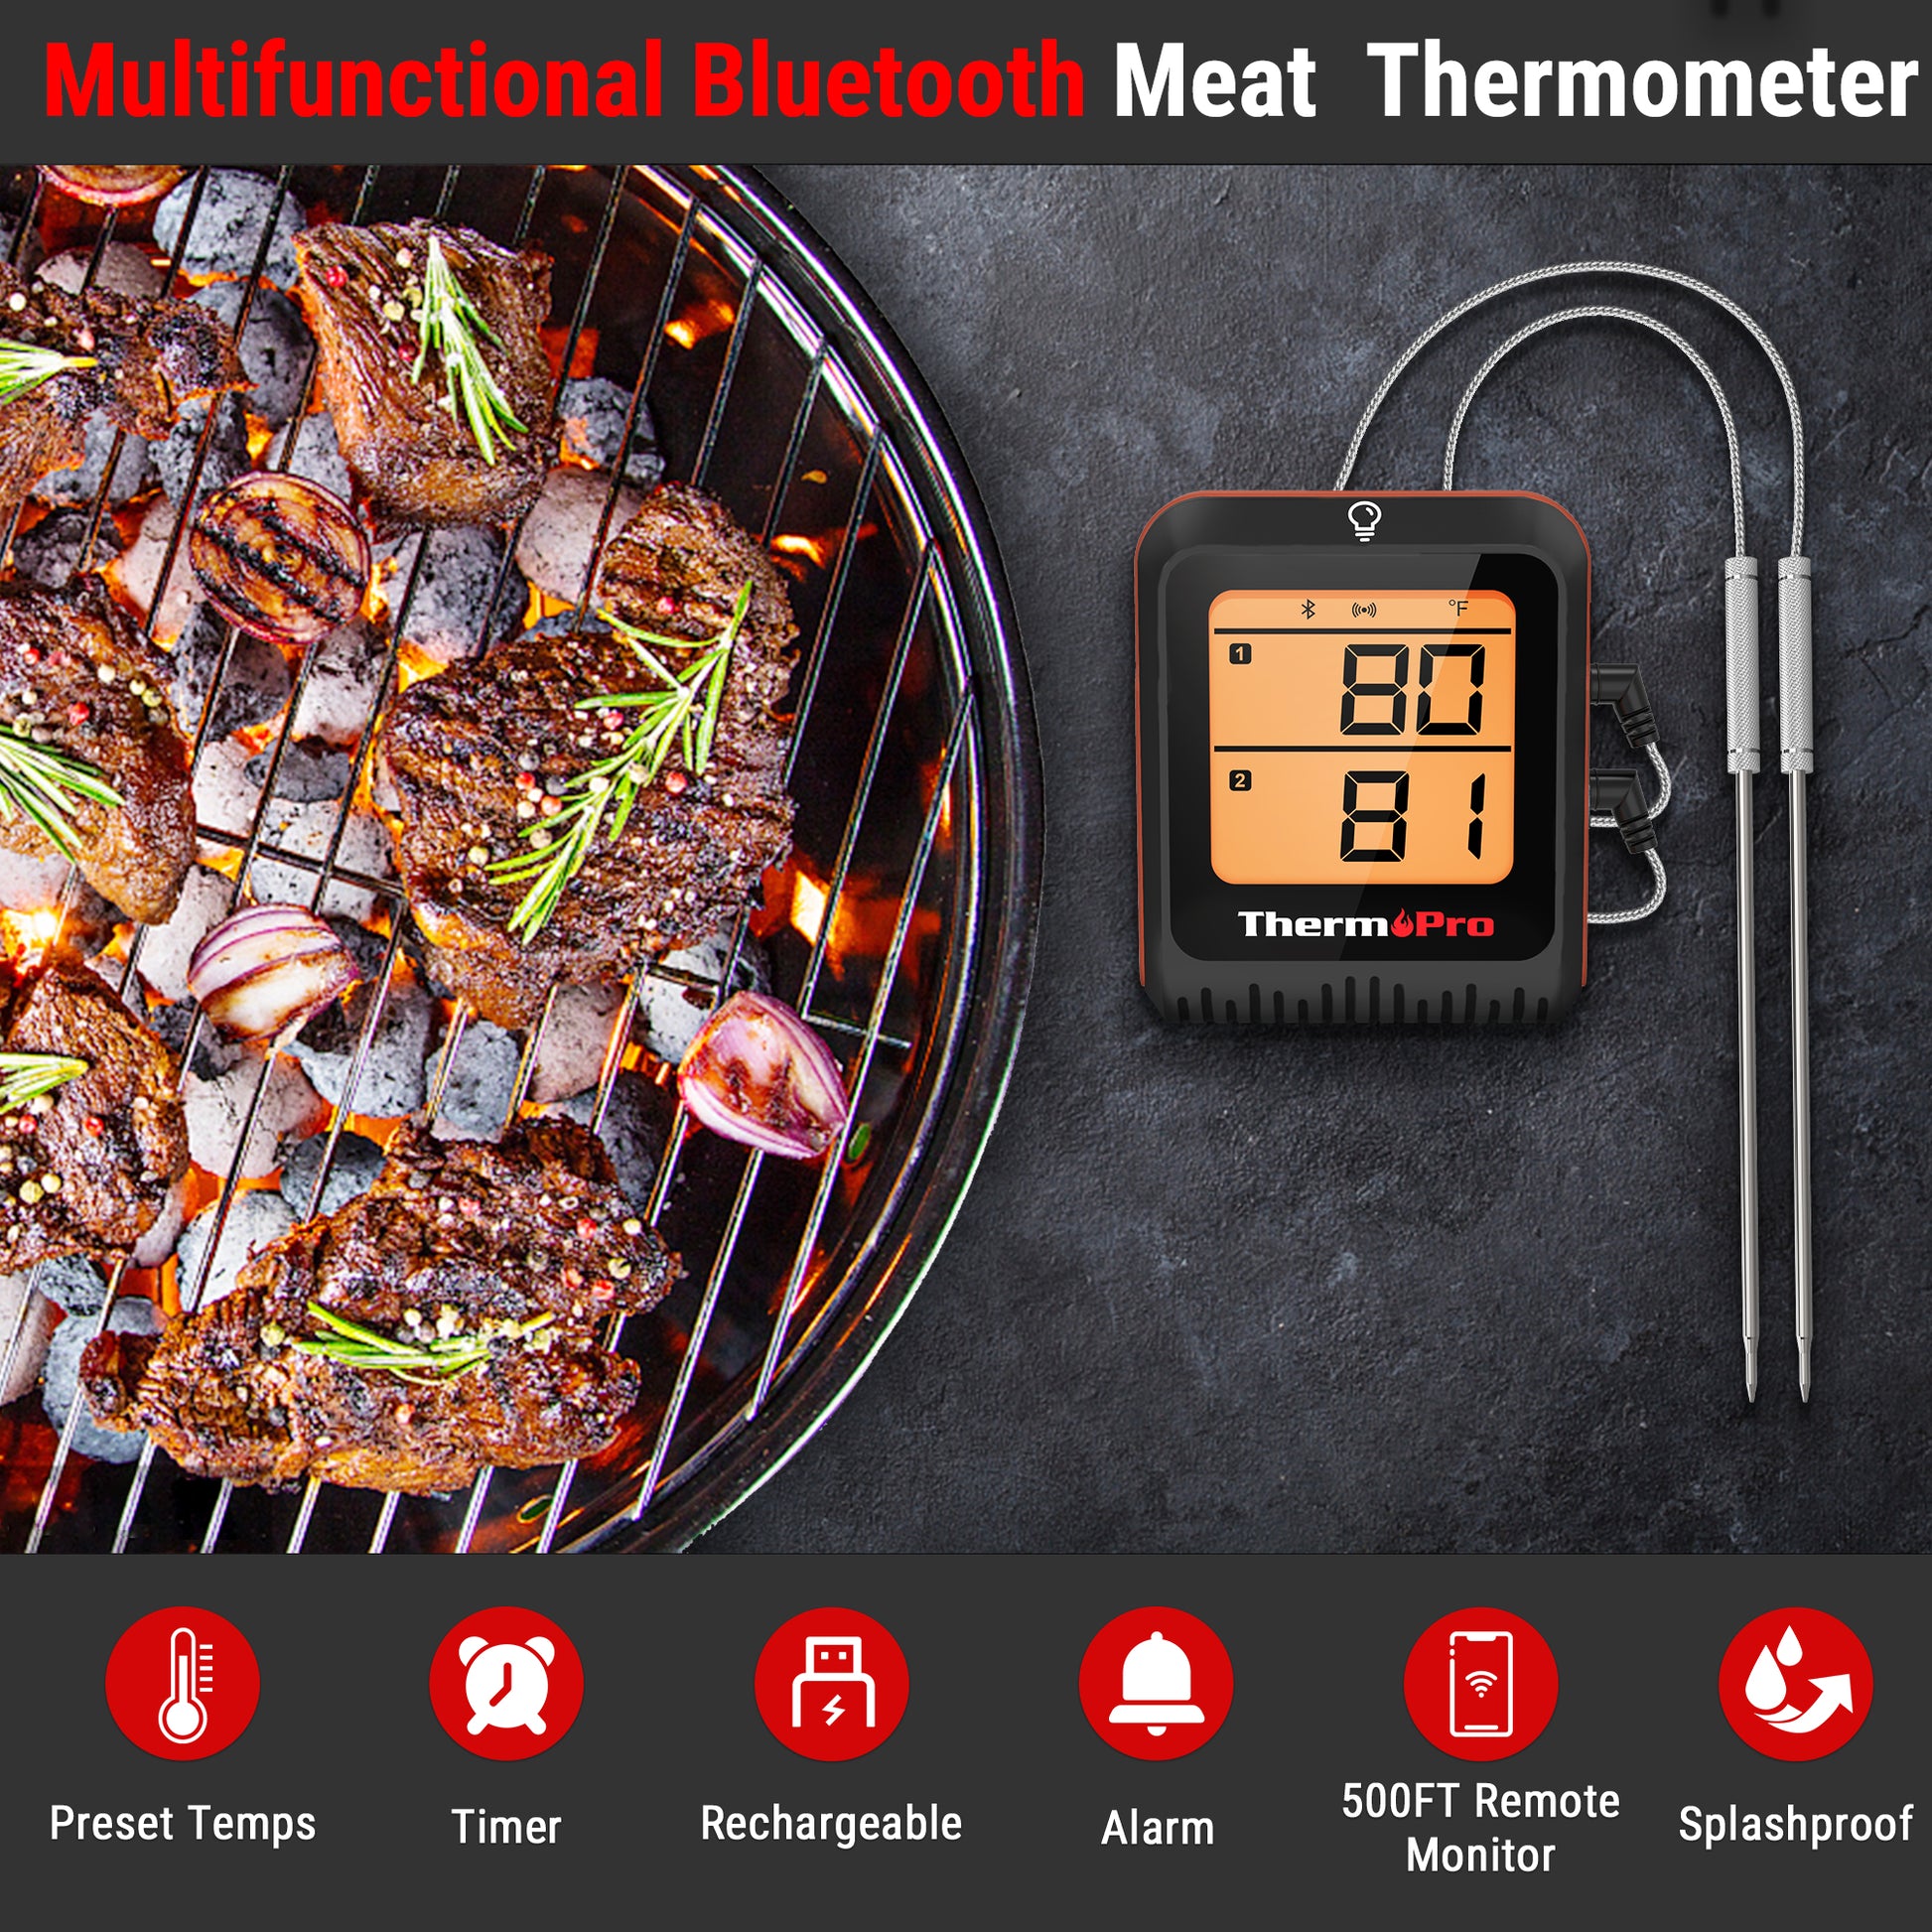 ThermoPro Launches Twin TempSpike Bluetooth Meat Thermometer